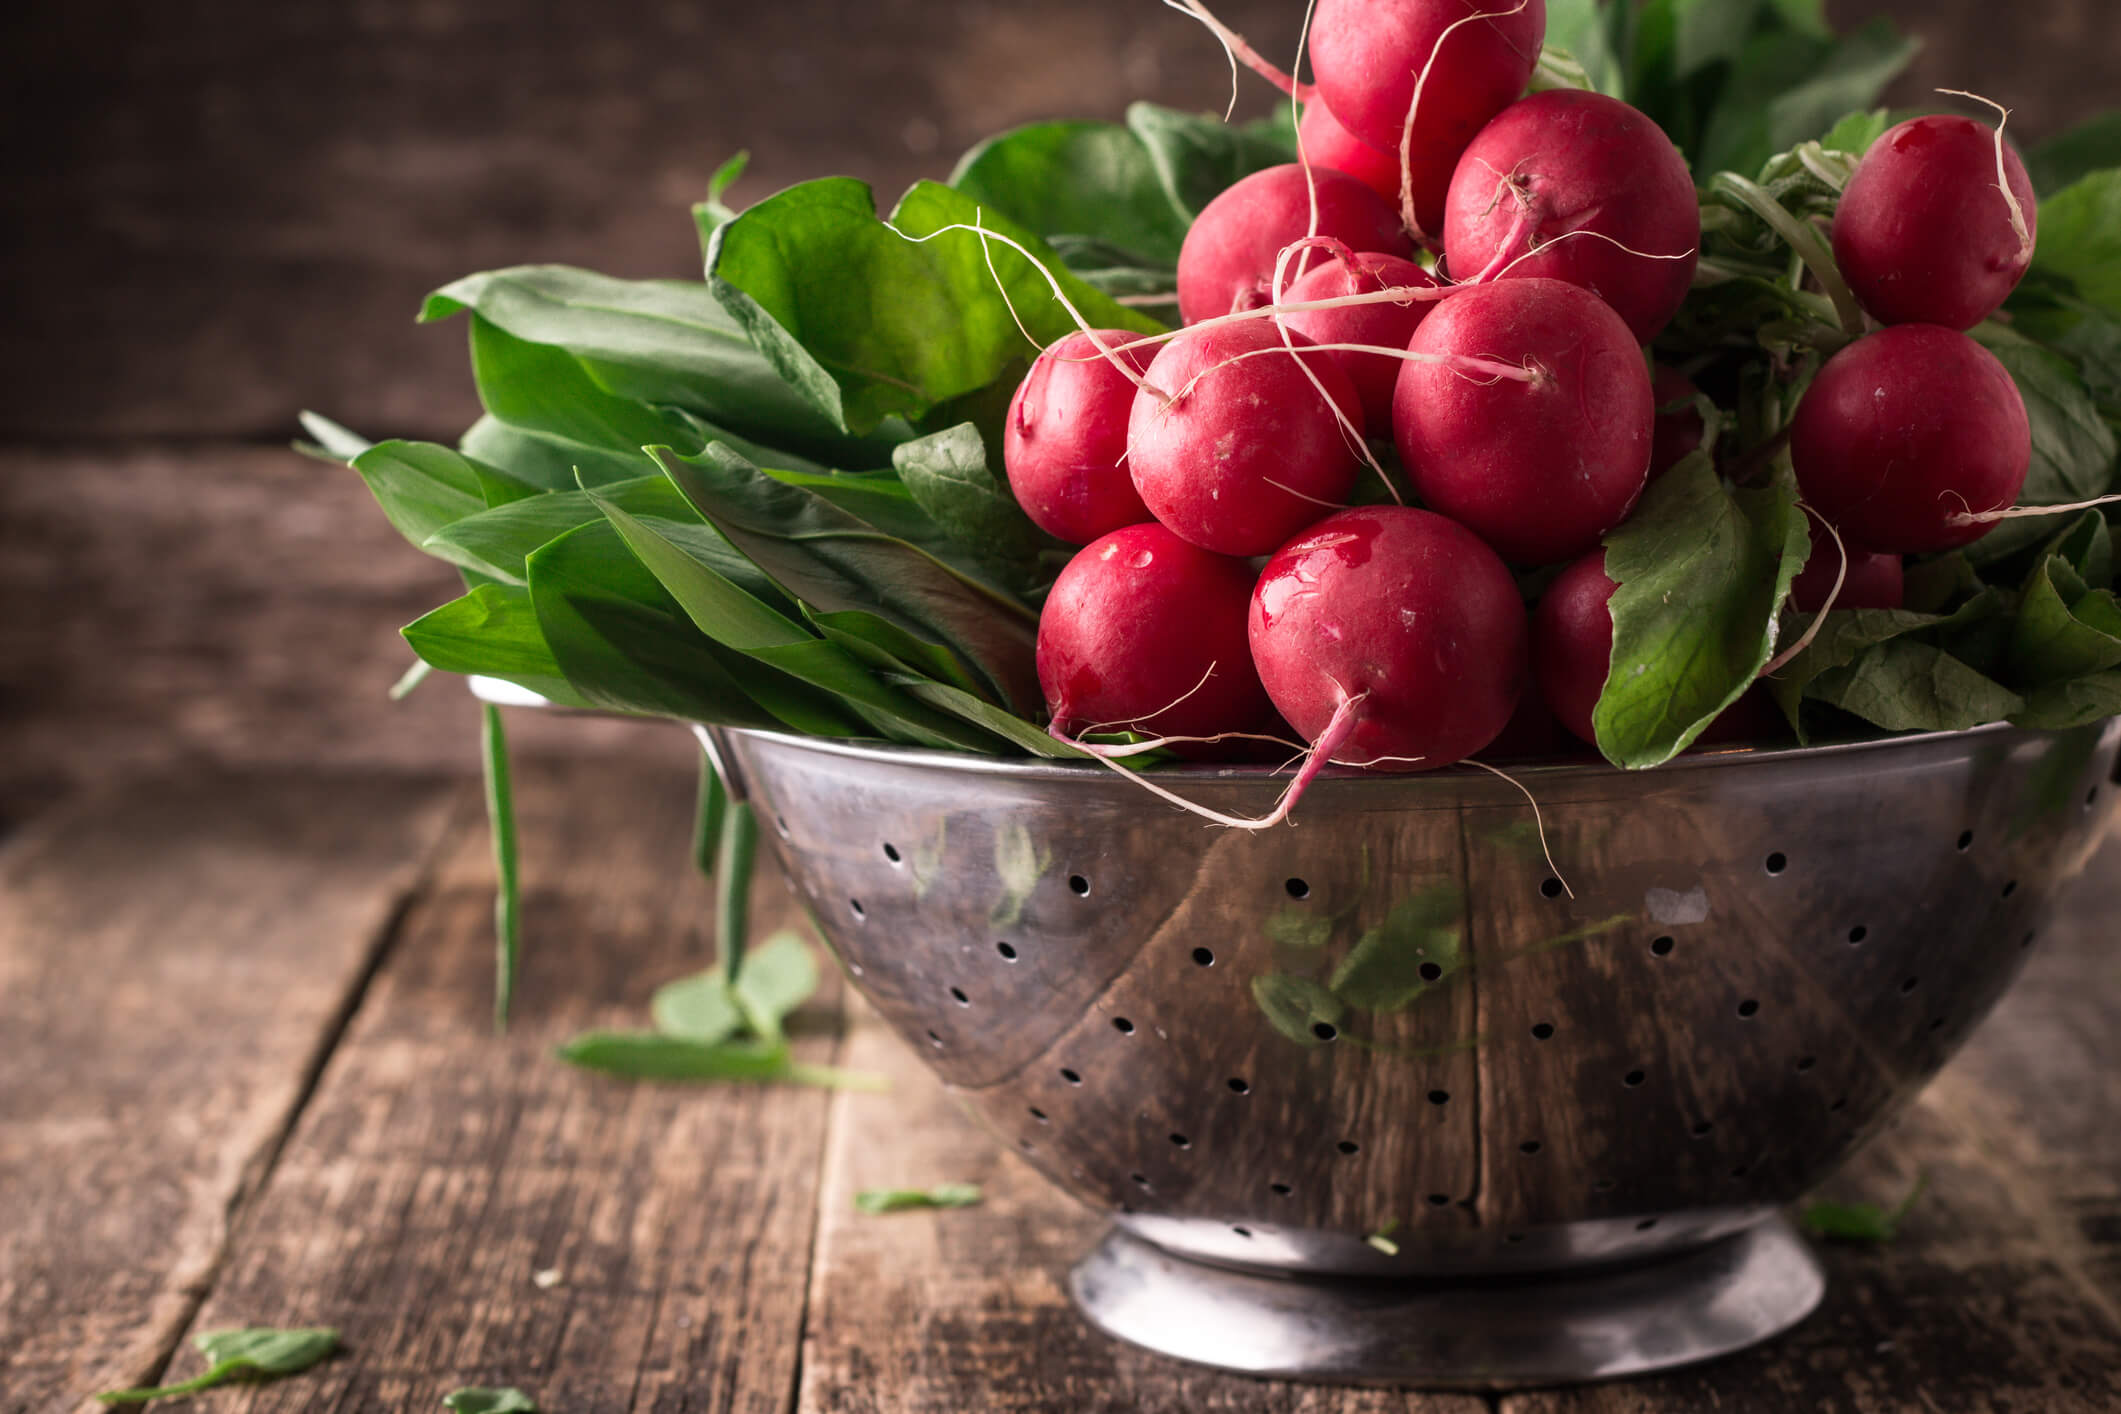 Spring vegetables and fruits: radishes